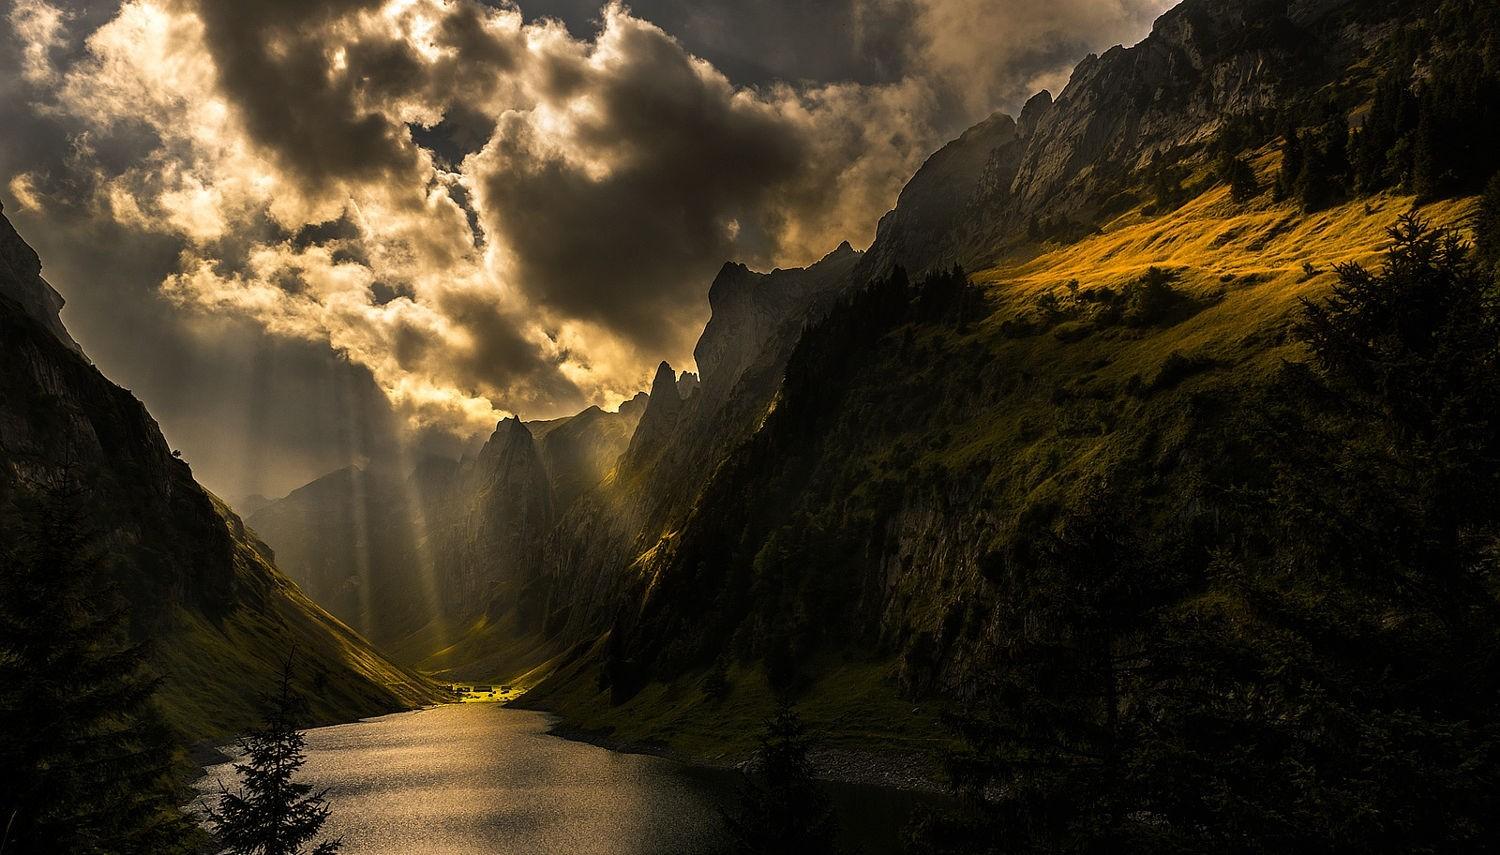 #mountains, #lake, #clouds, #nature, #photography